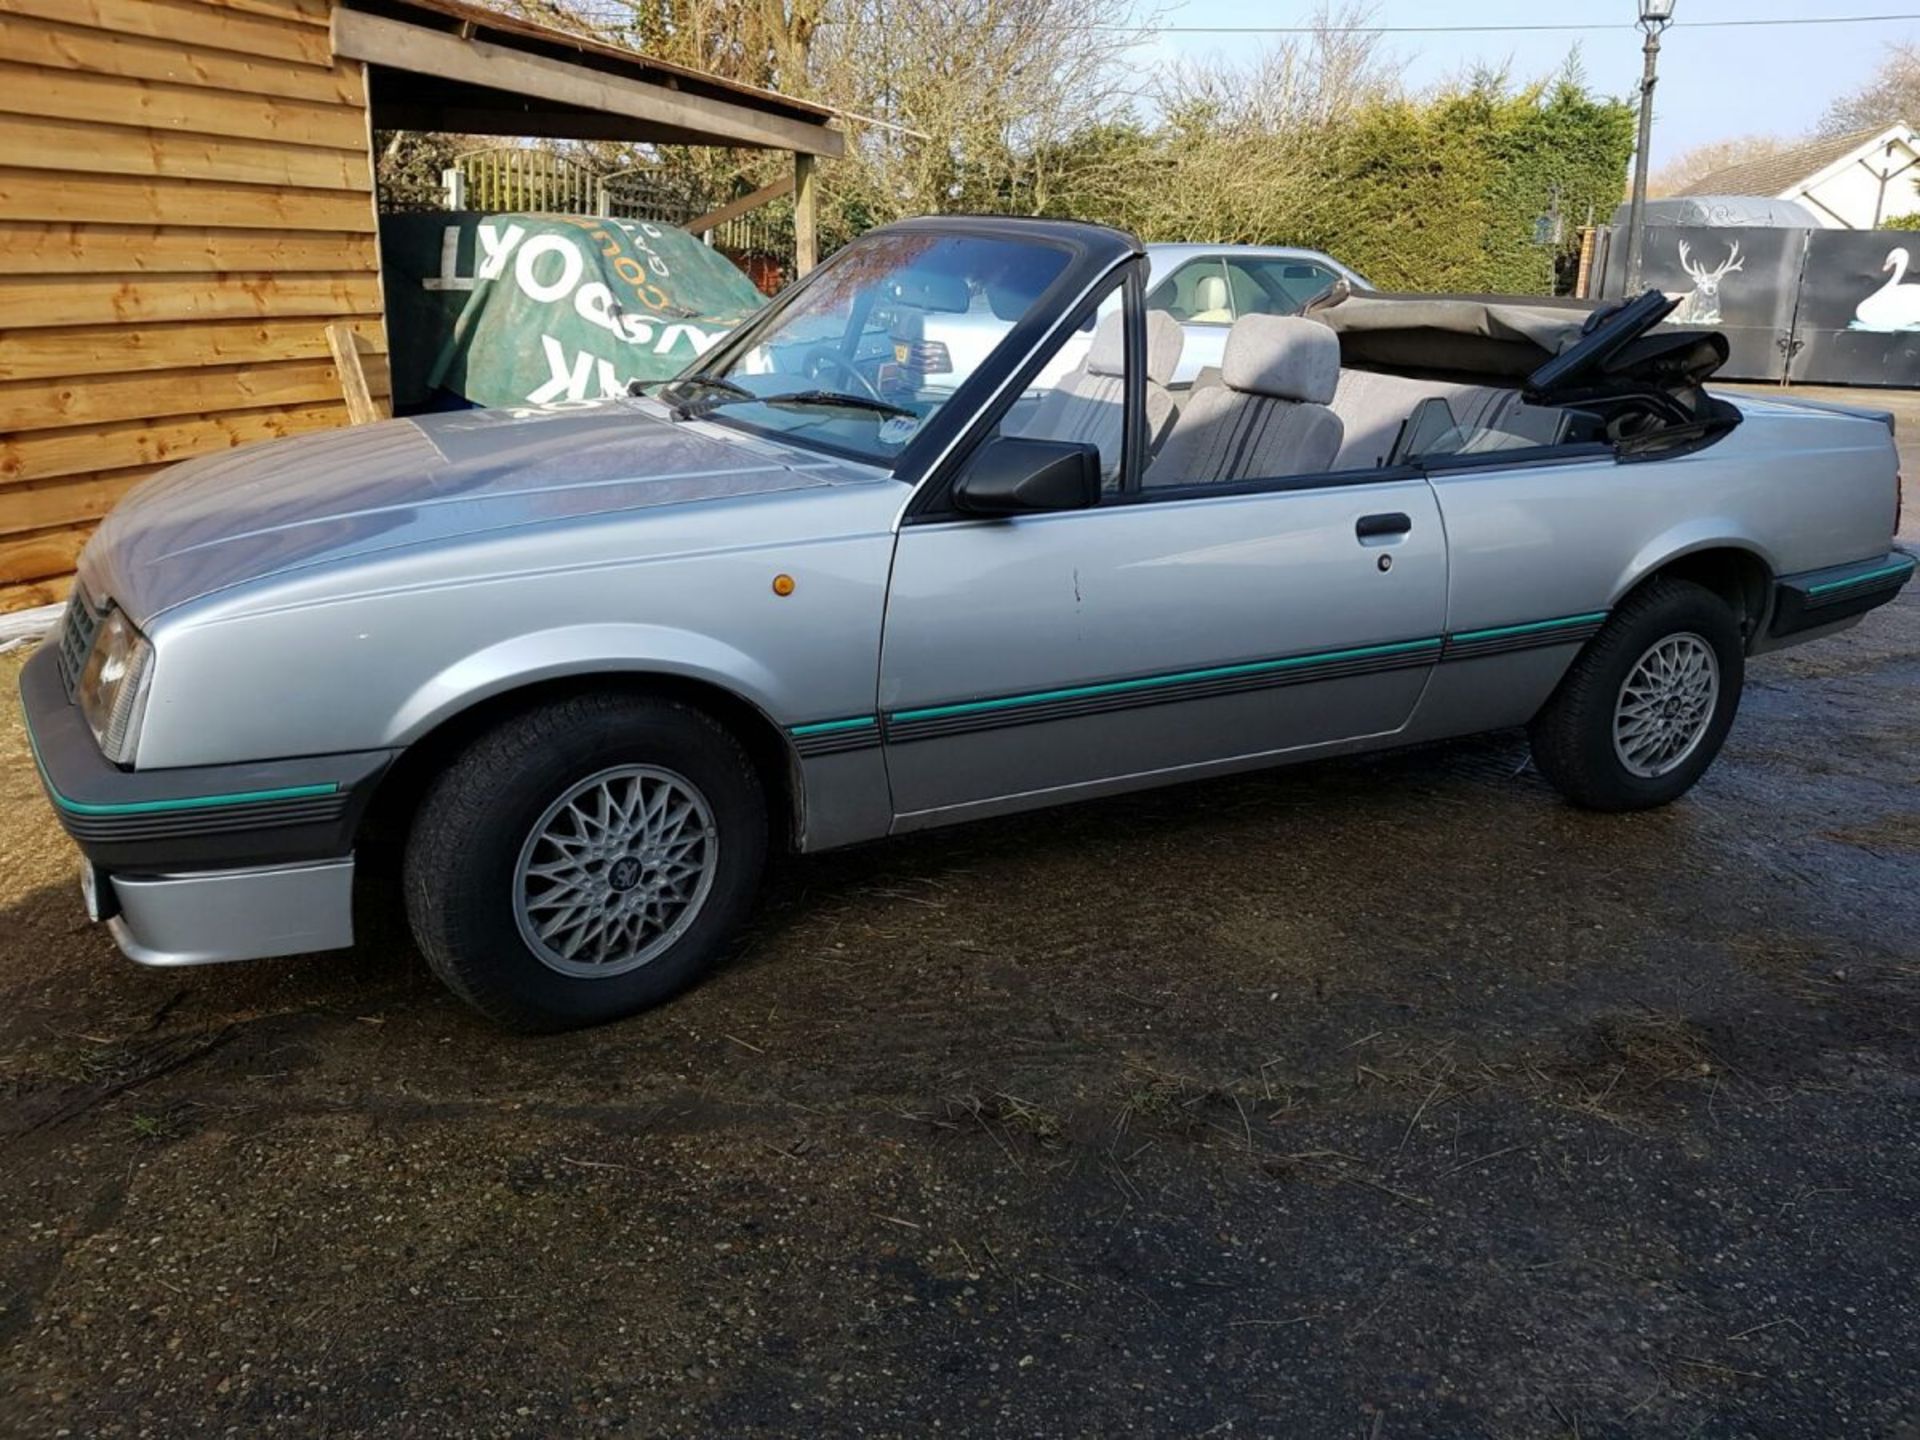 Vauxhall Cavalier Convertible 1986 - We cannot remember the last time we saw one of these! A 1986